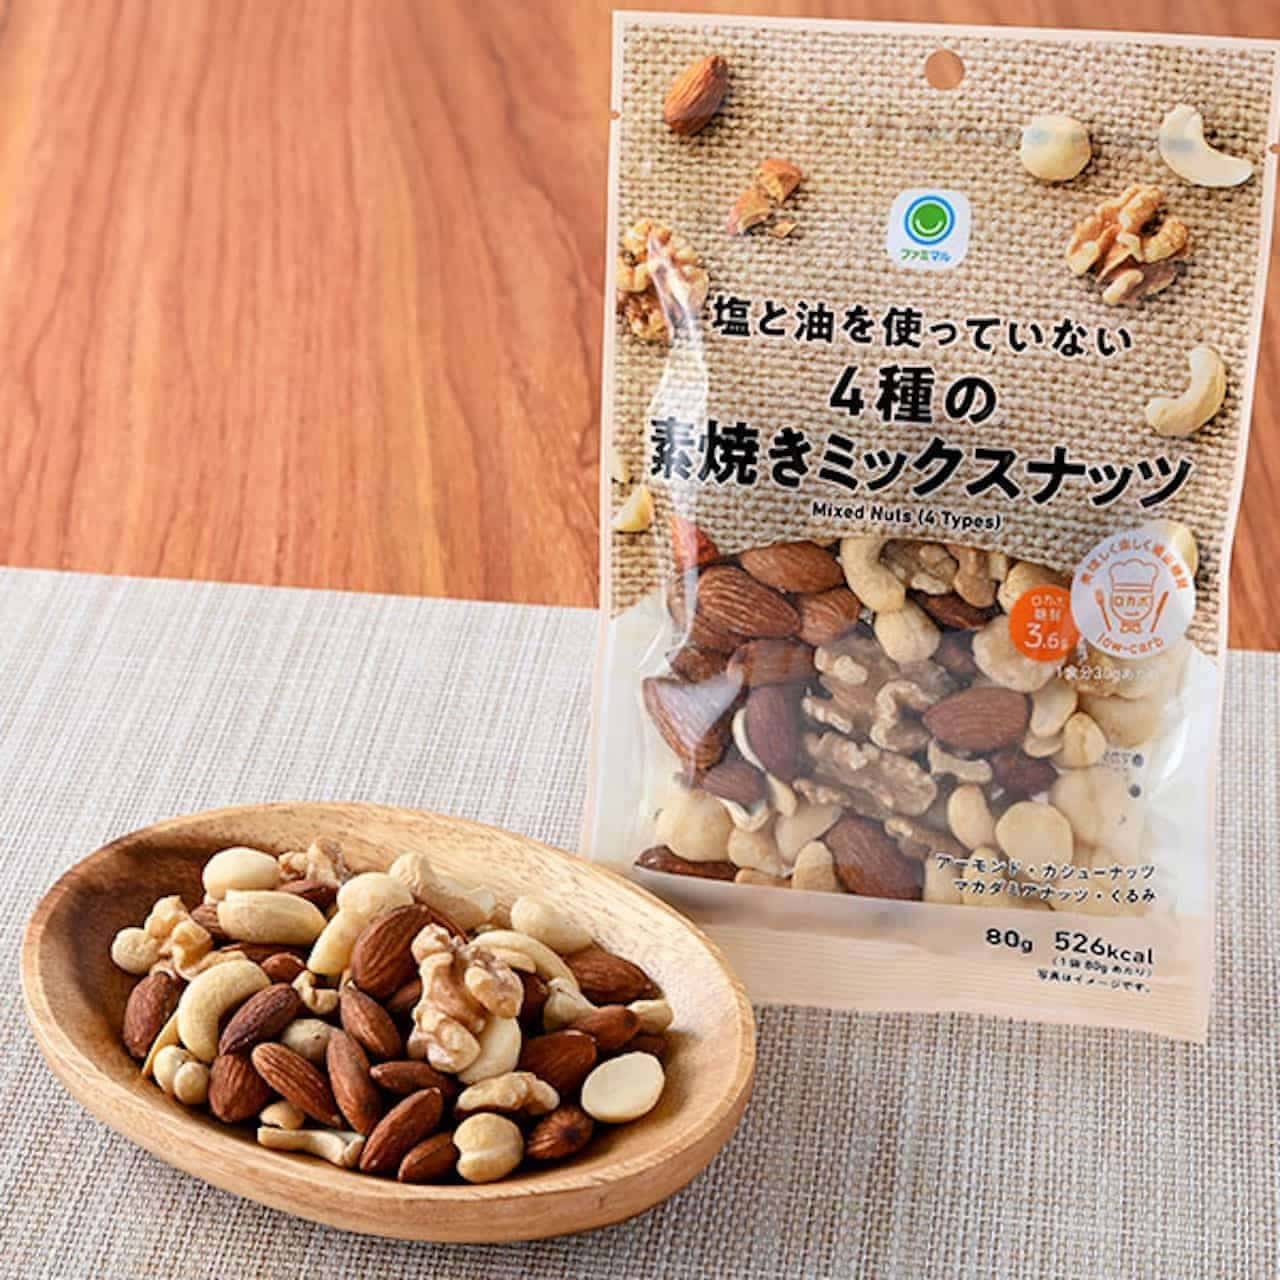 Famima "4 kinds of unbaked mixed nuts without salt and oil